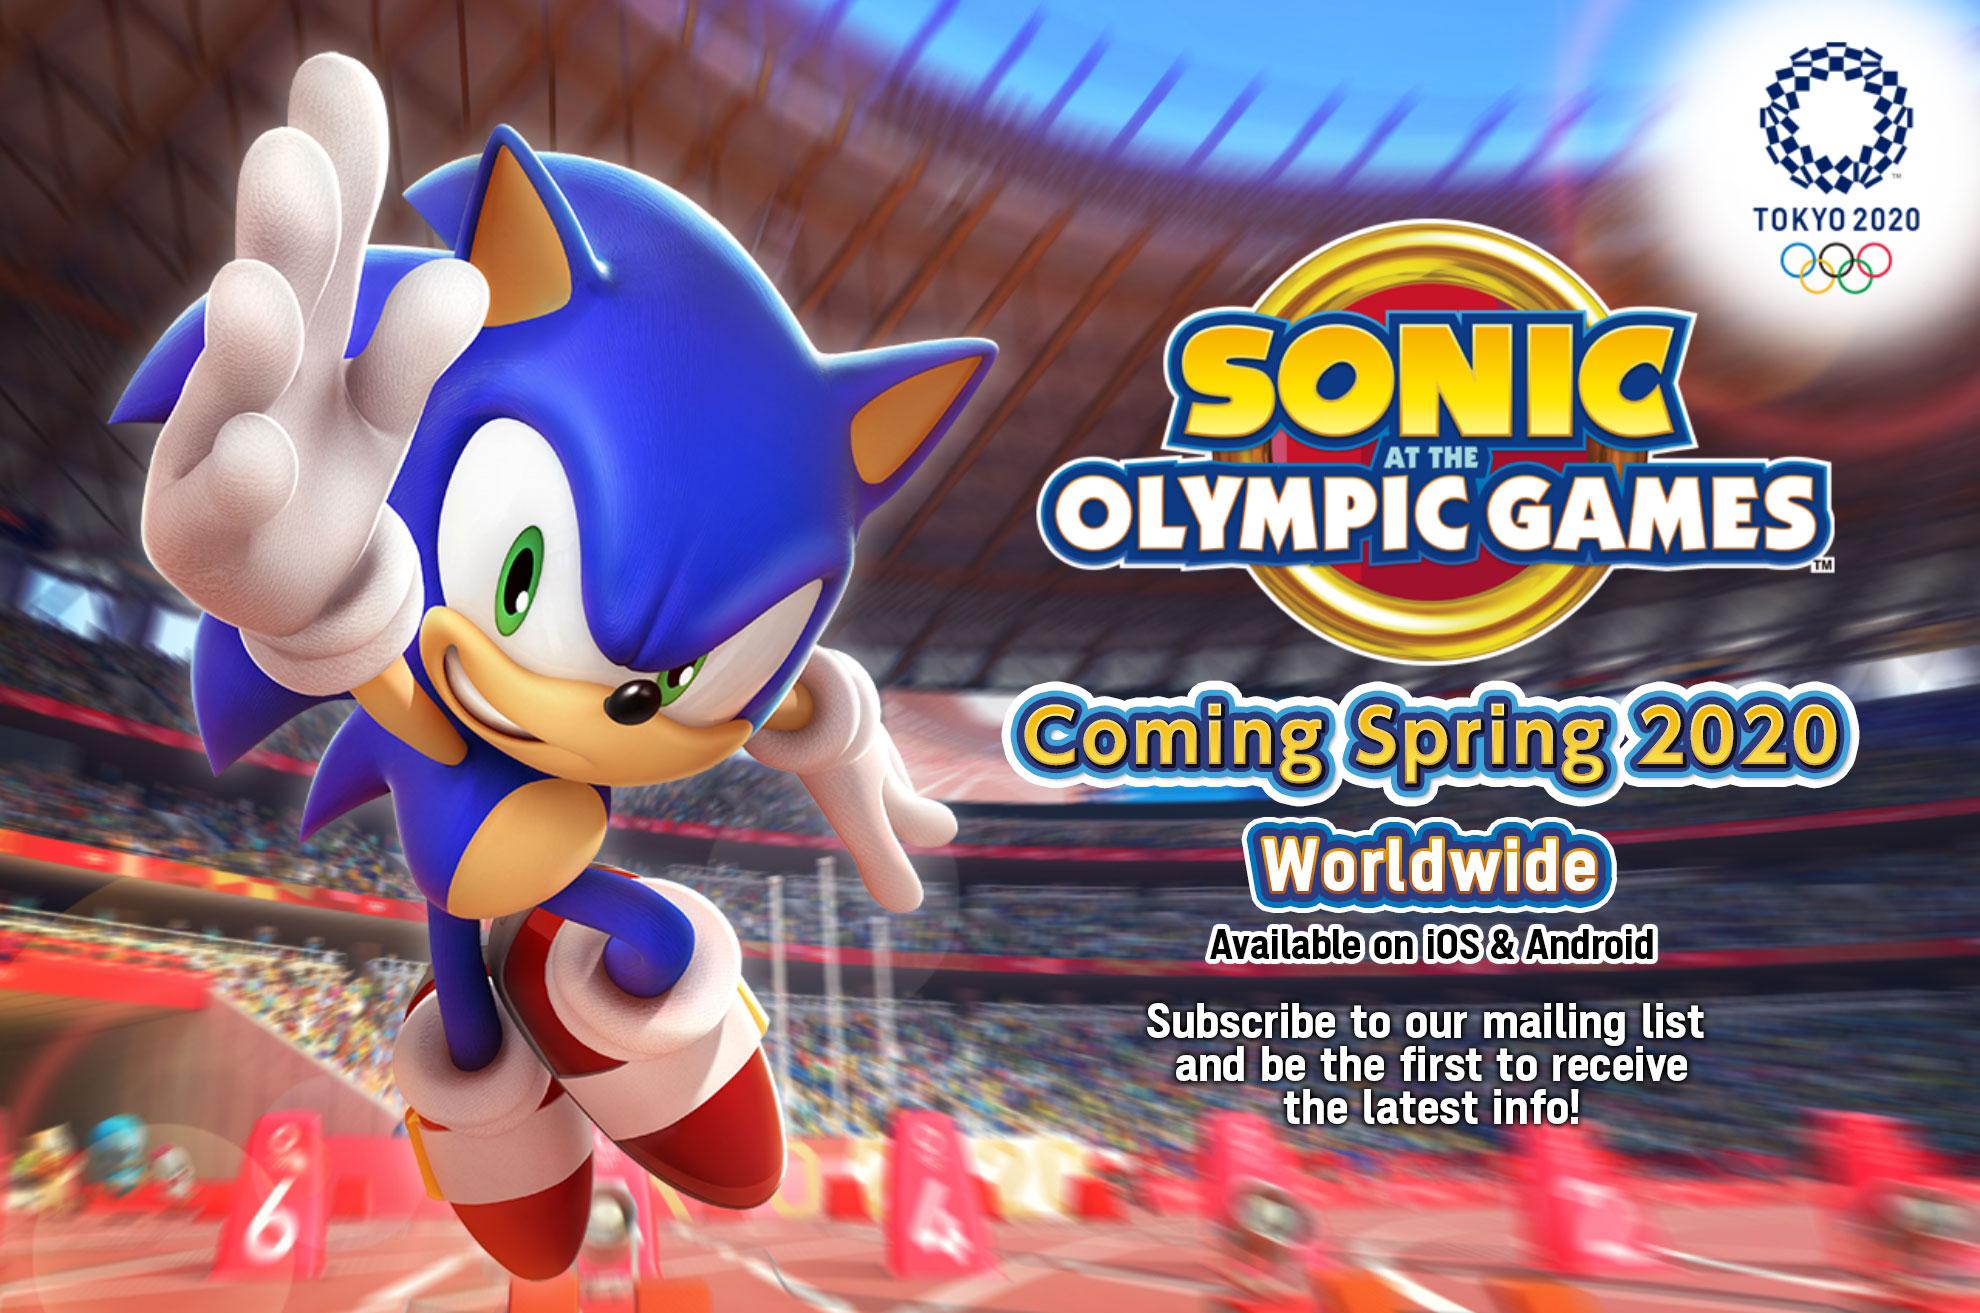 CHECK OUT THE FIRST IMAGES REVEALED FOR SONIC AT THE OLYMPIC